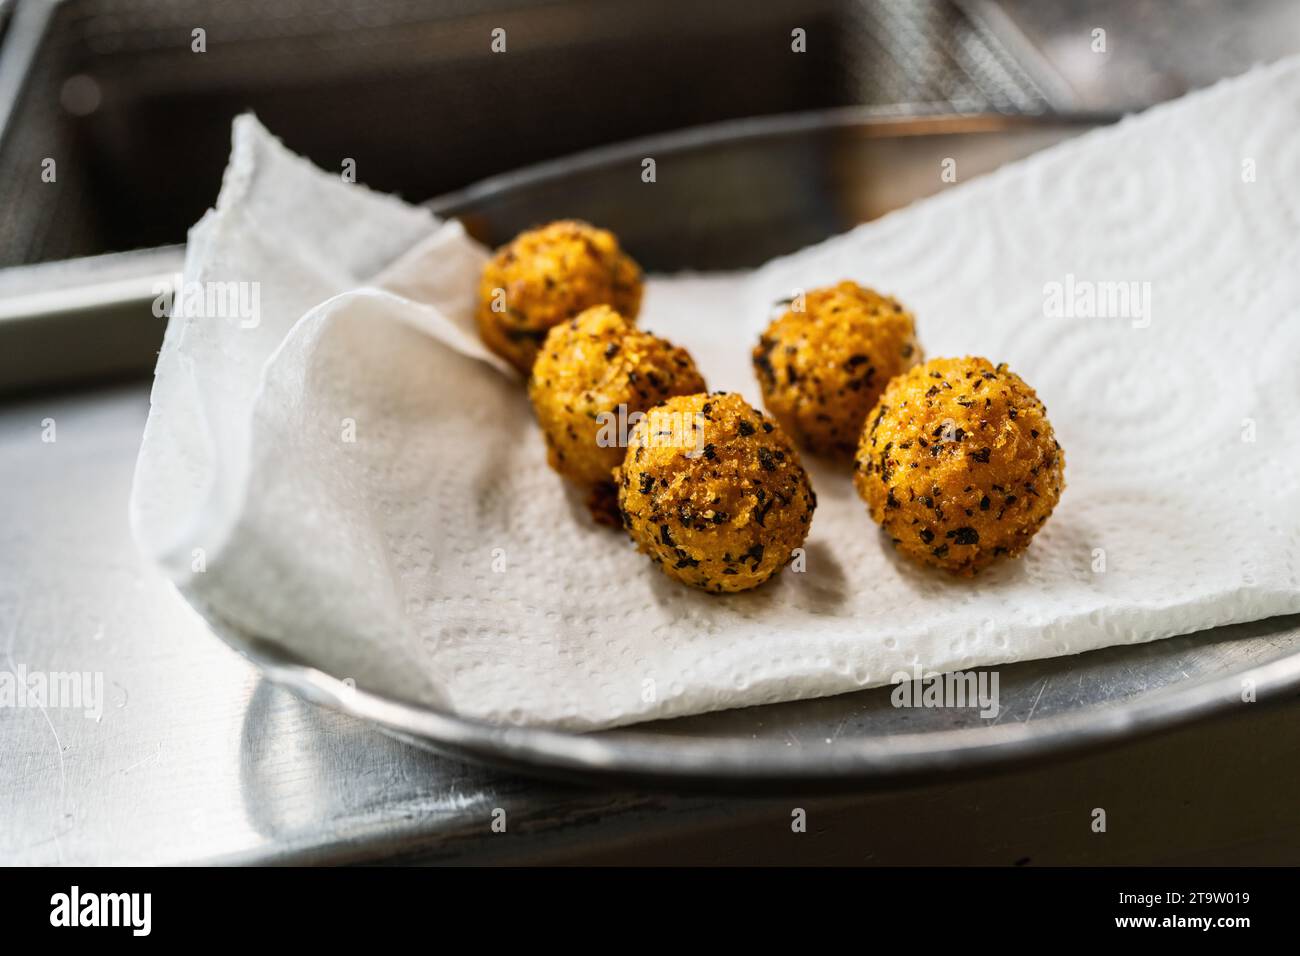 Luxurious appetizer of fried potato balls with herbs in kitchen of a restaurant. Food Photography Concept image Stock Photo